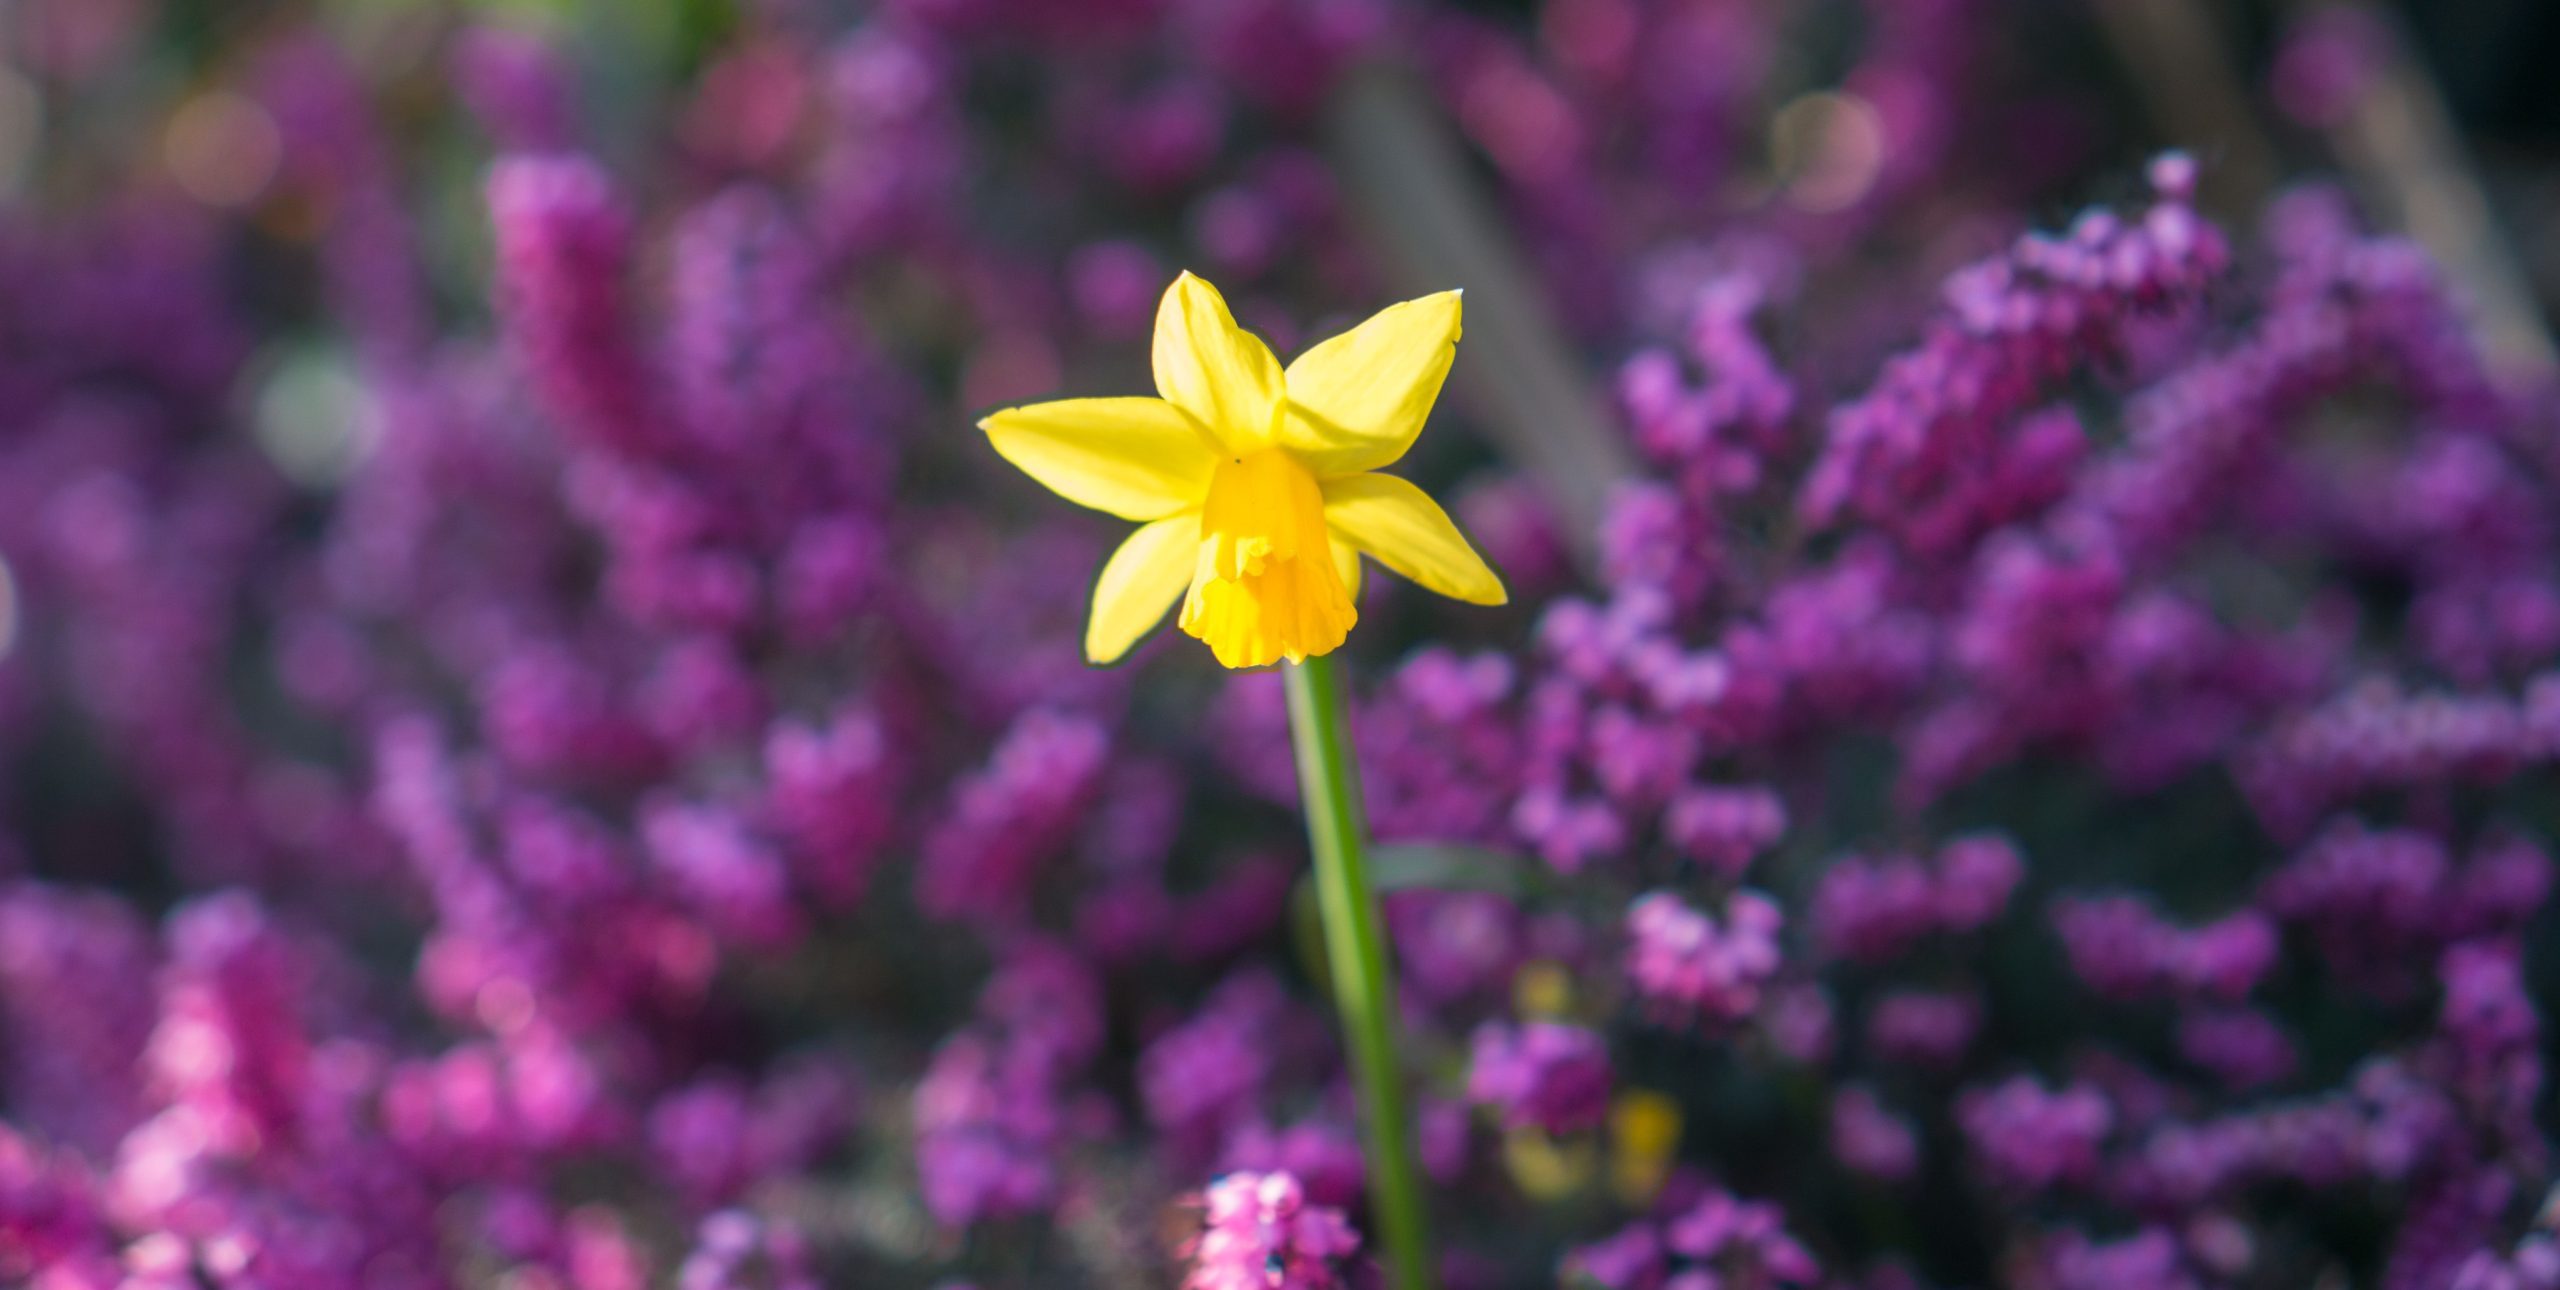 Yellow flower among purple flowers as part of an article about articulating your value proposition.